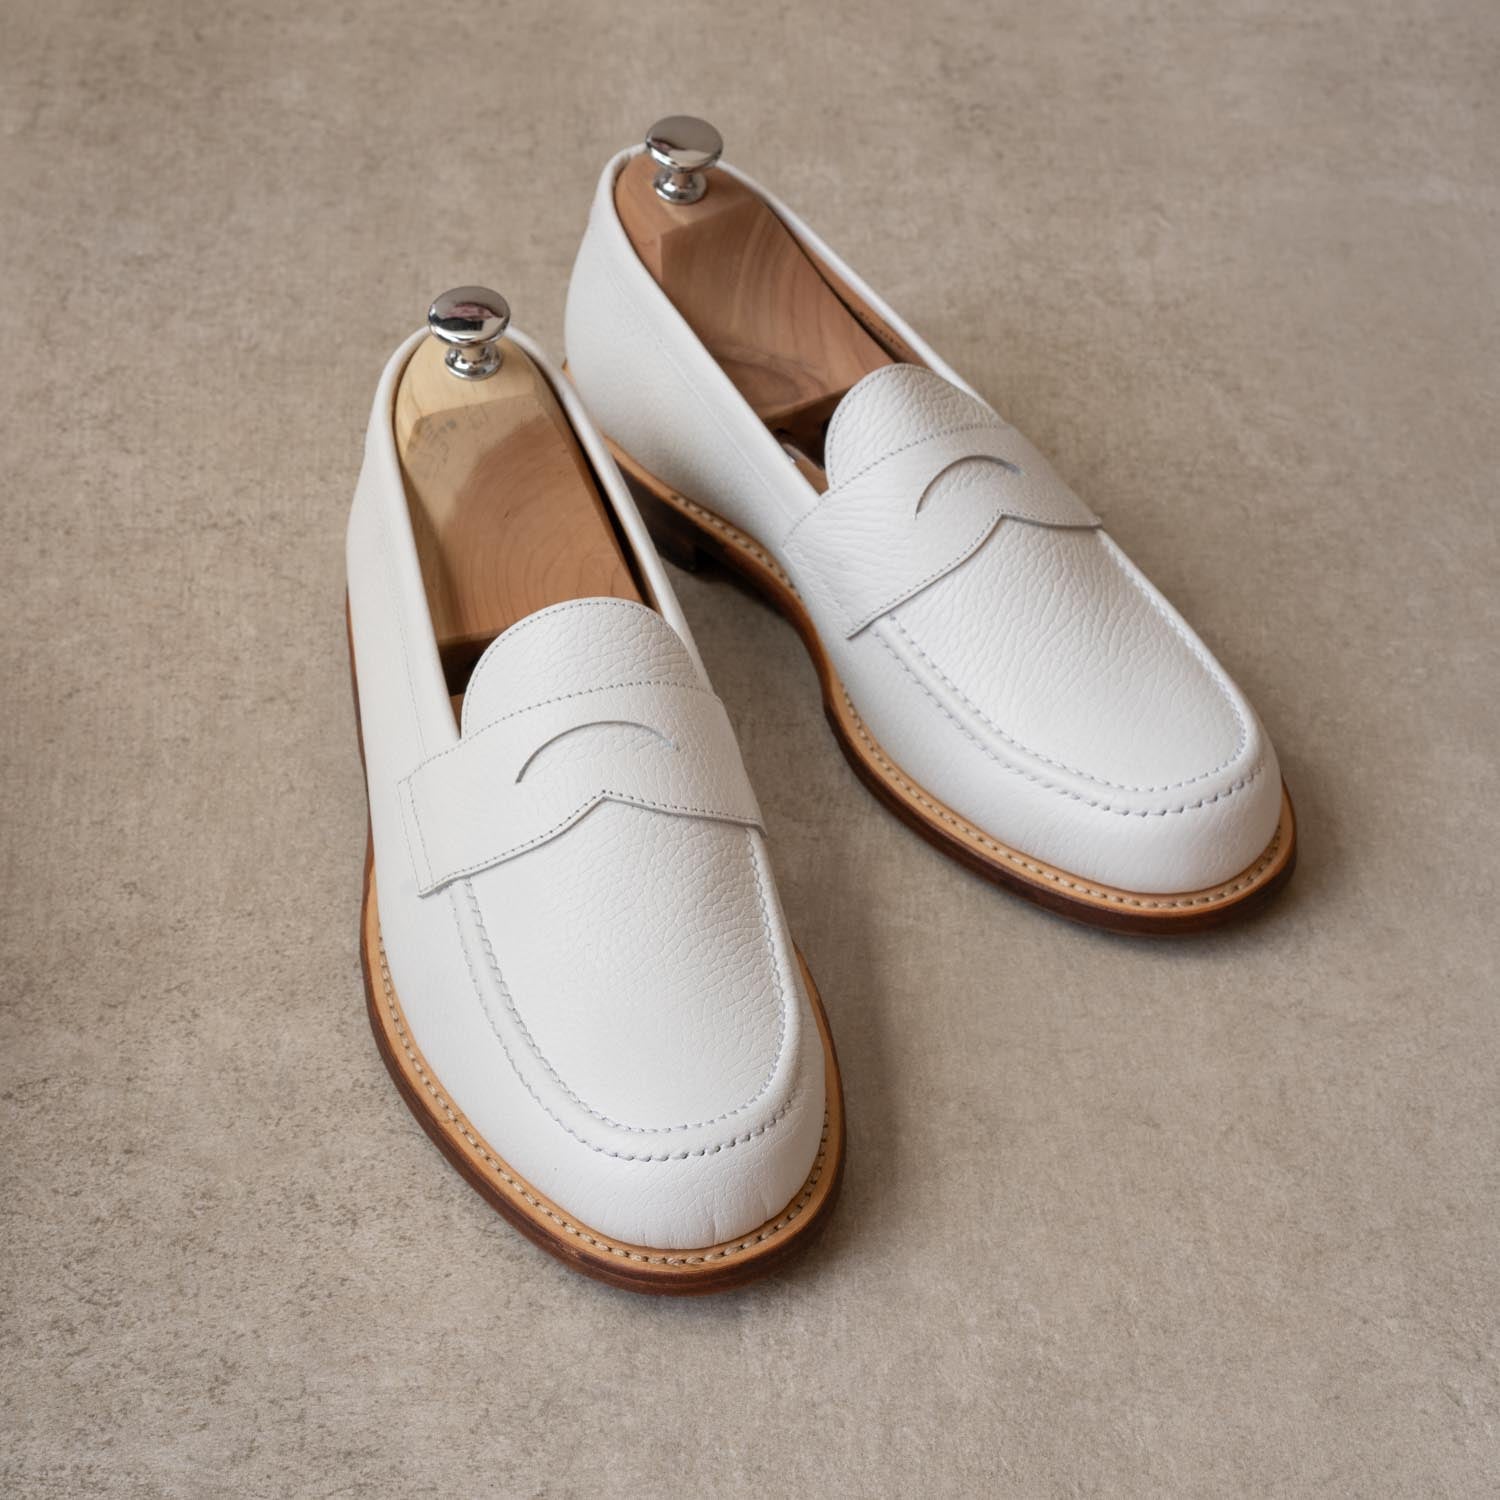 Penny Loafer - Chaussures Mocassin Cuir Blanc